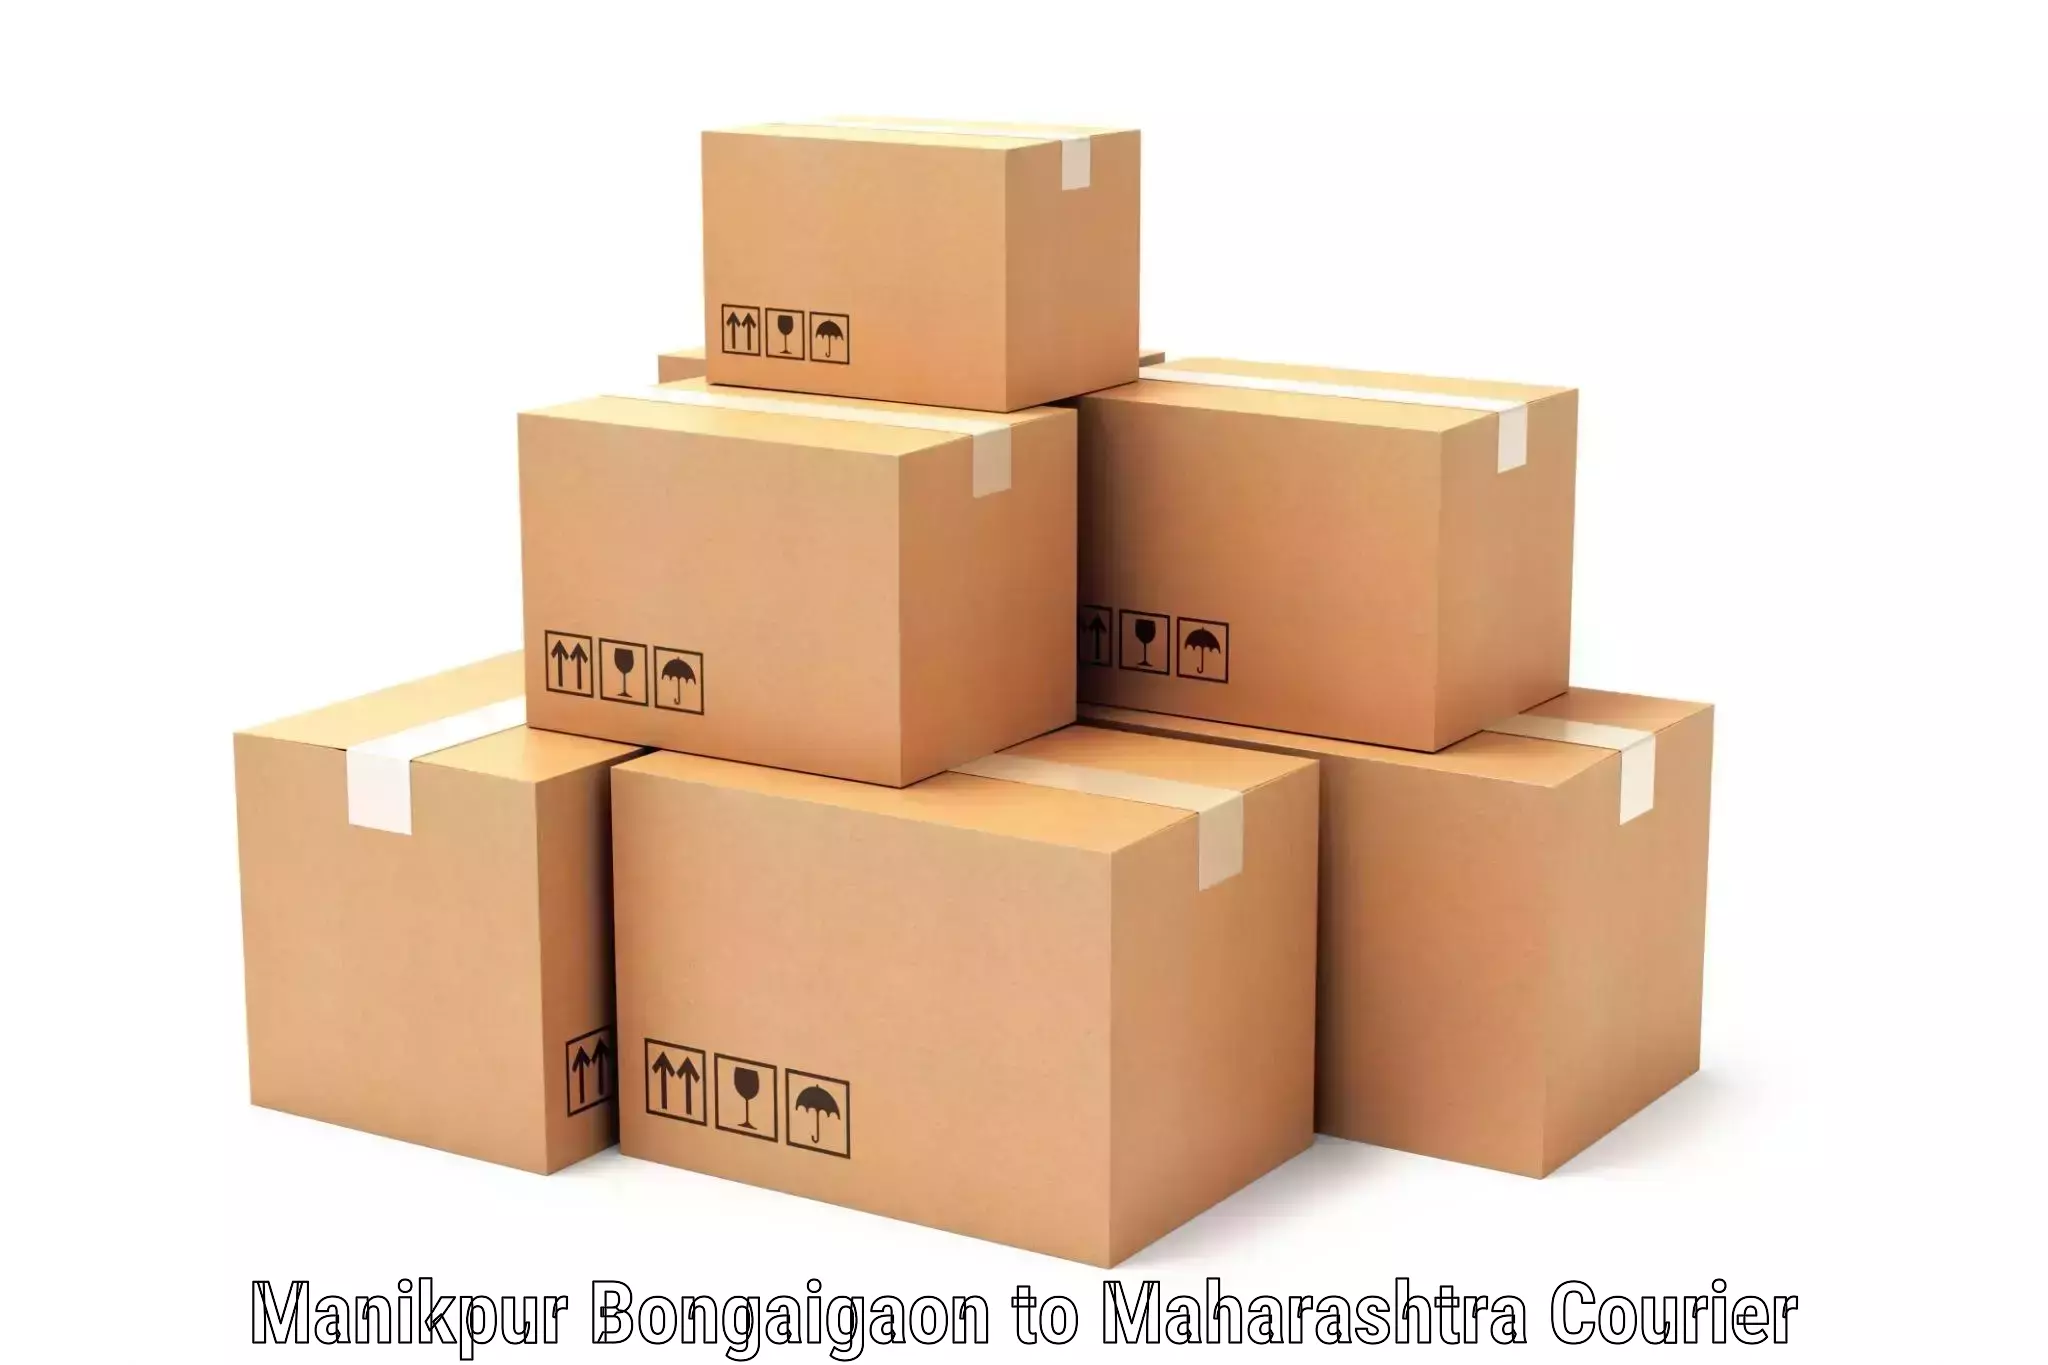 High value parcel delivery in Manikpur Bongaigaon to Dharmabad